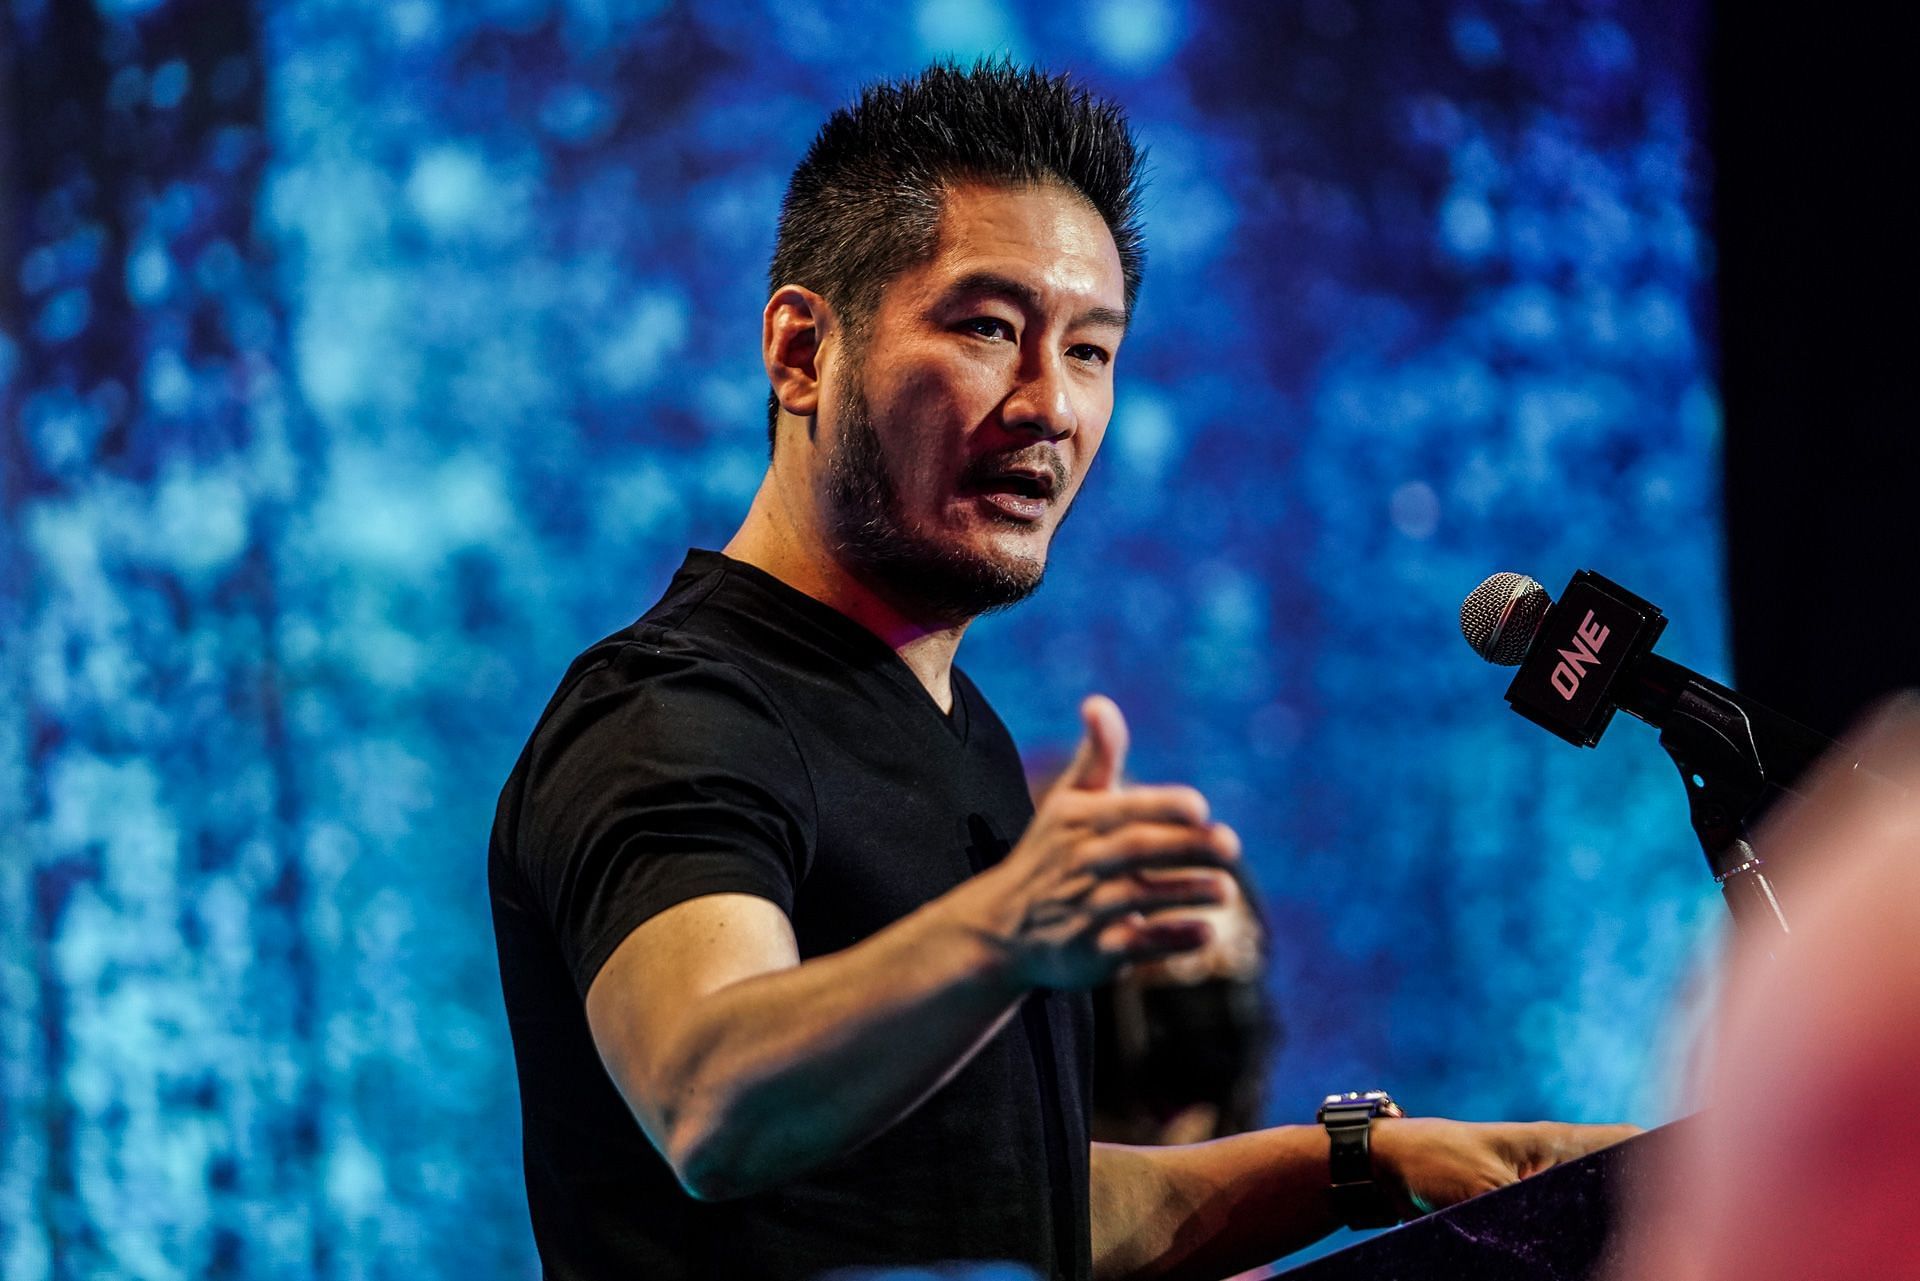 ONE Chairman and CEO Chatri Sityodtong. [Photo: ONE Championship]